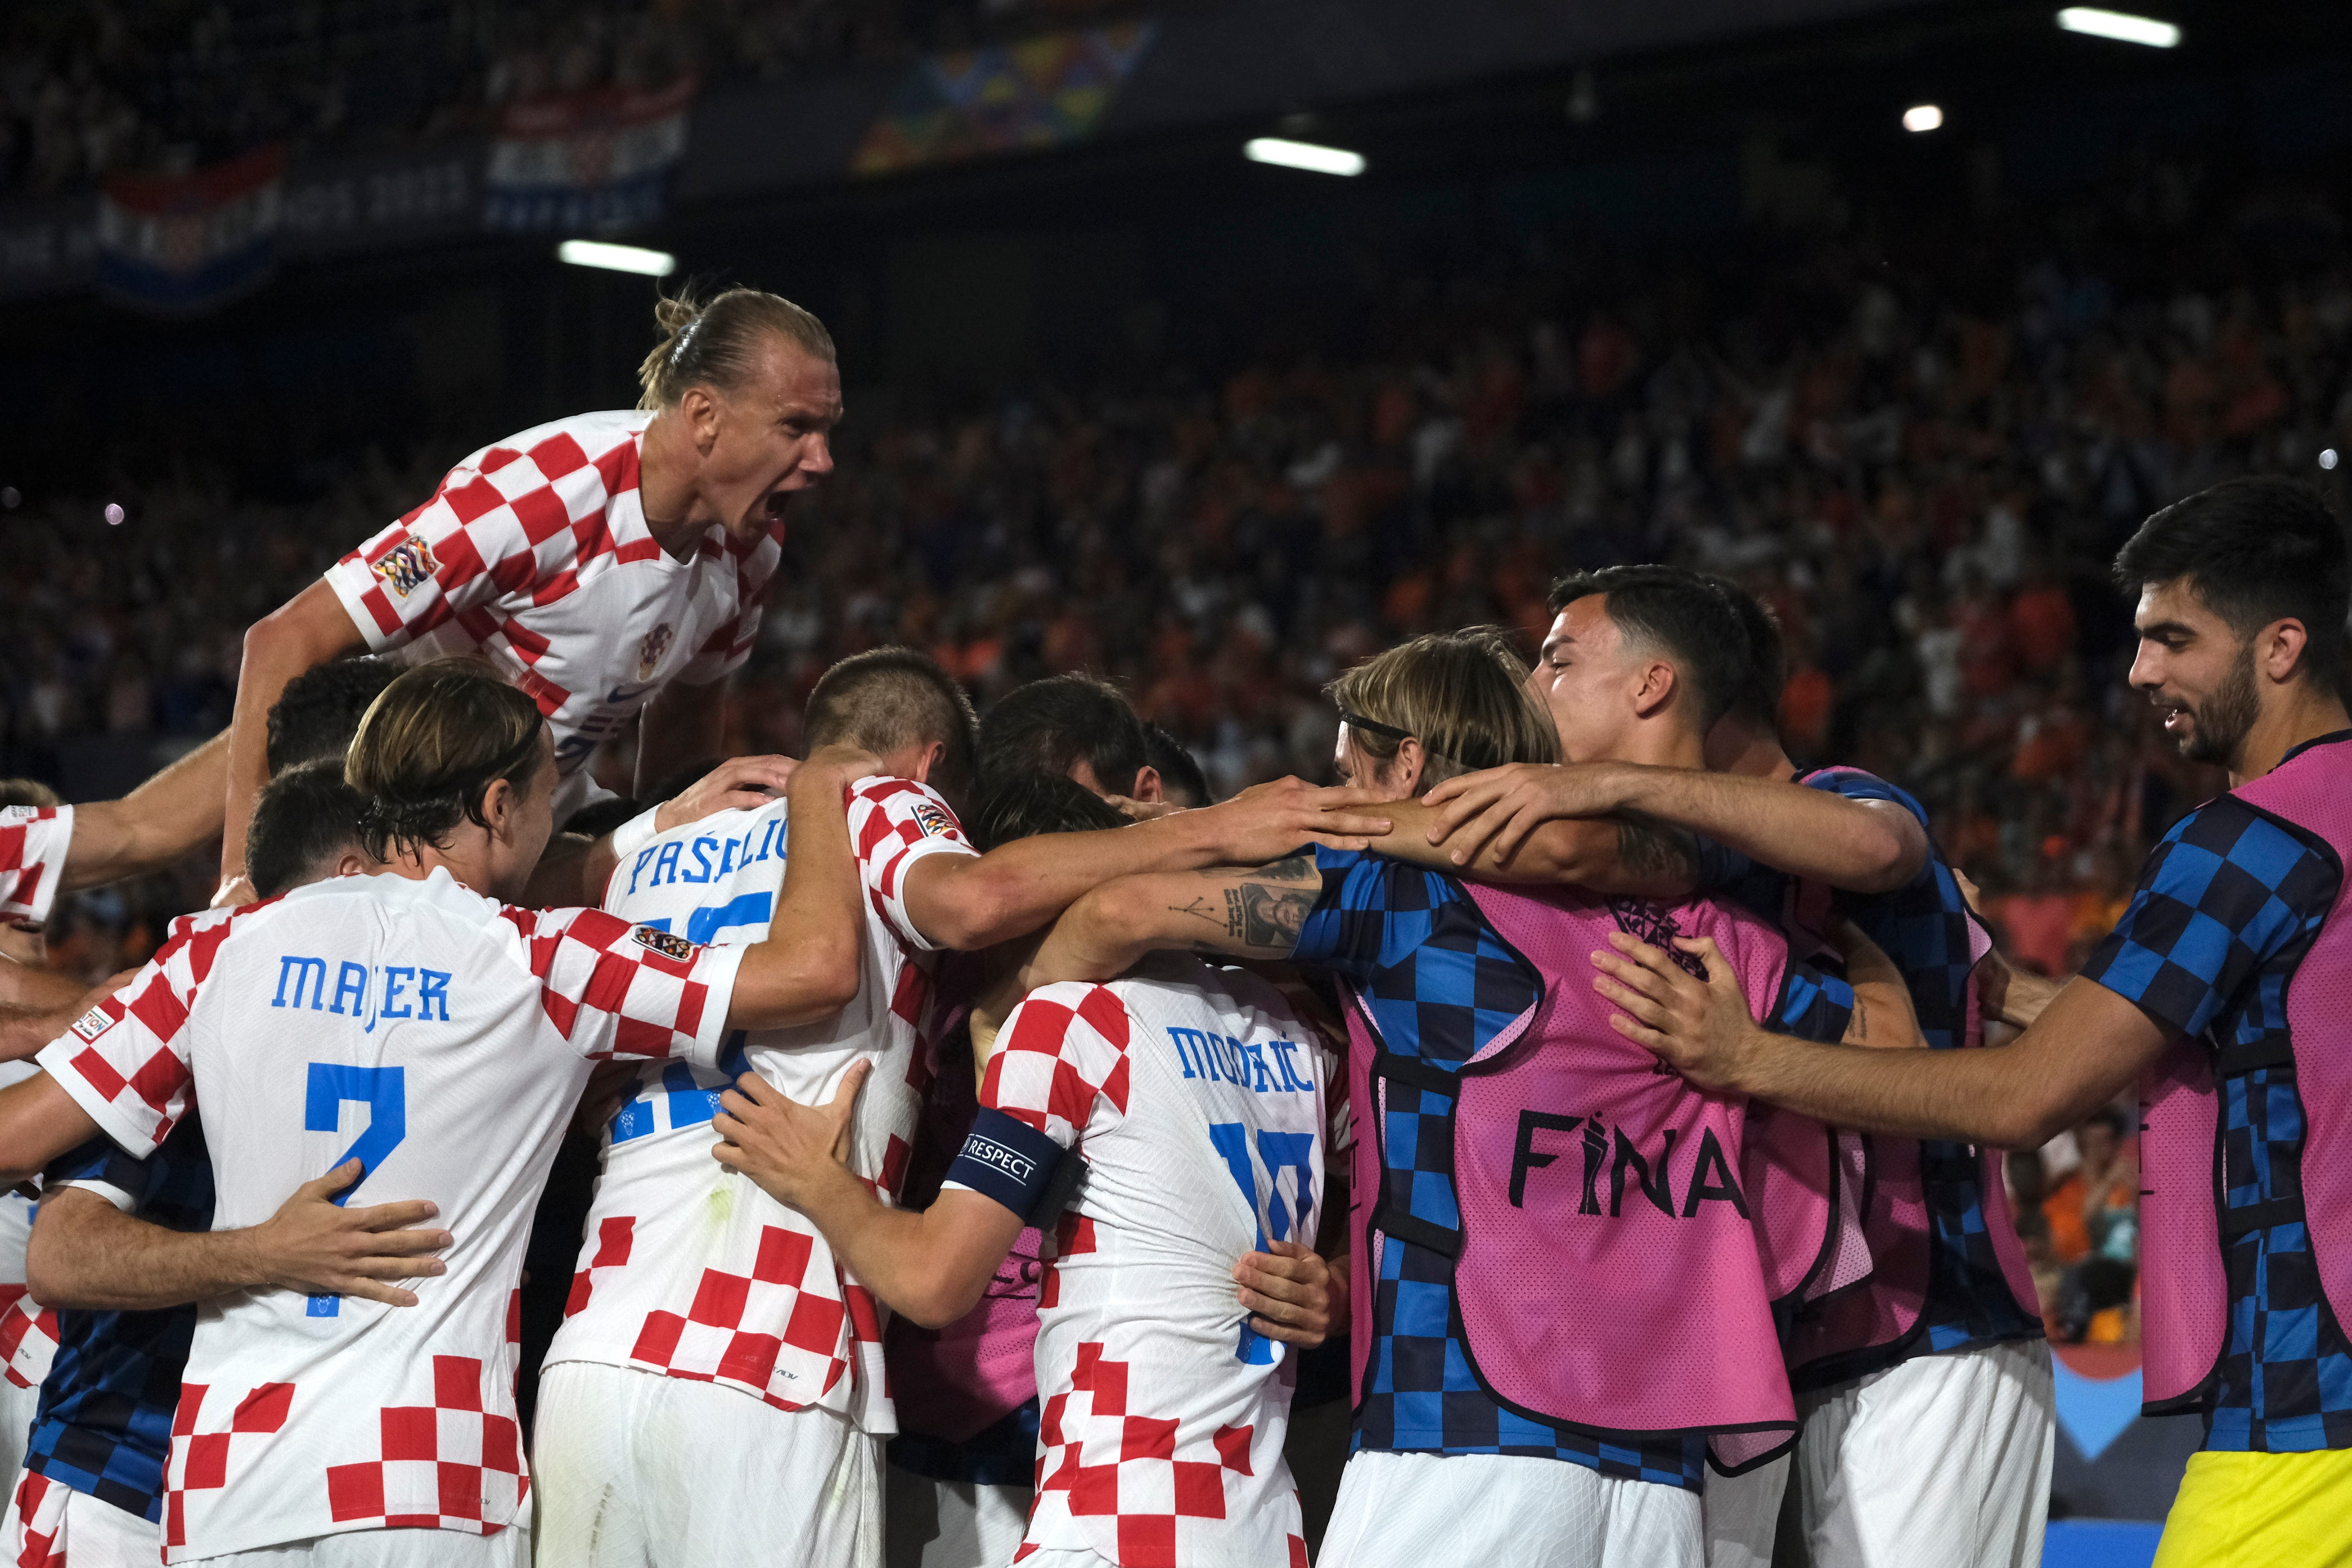 Croatia are through to the final (Patrick Post/AP)